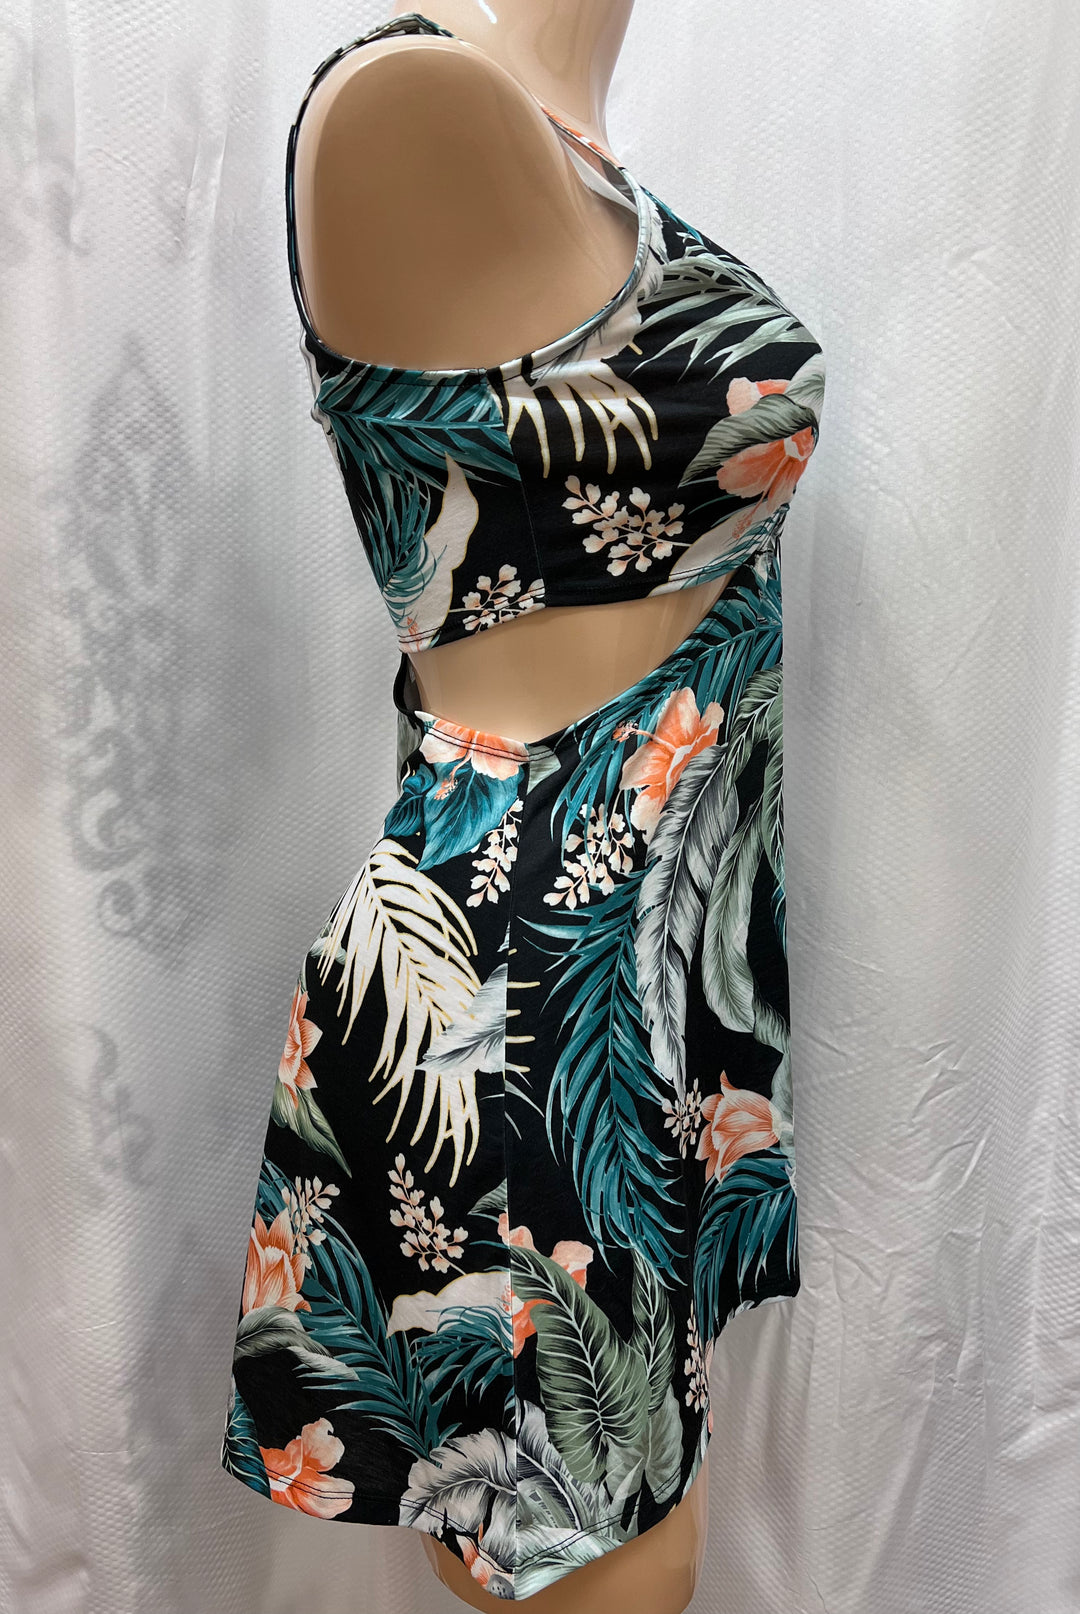 Tropical Cut-Out Cover Up - Size Medium